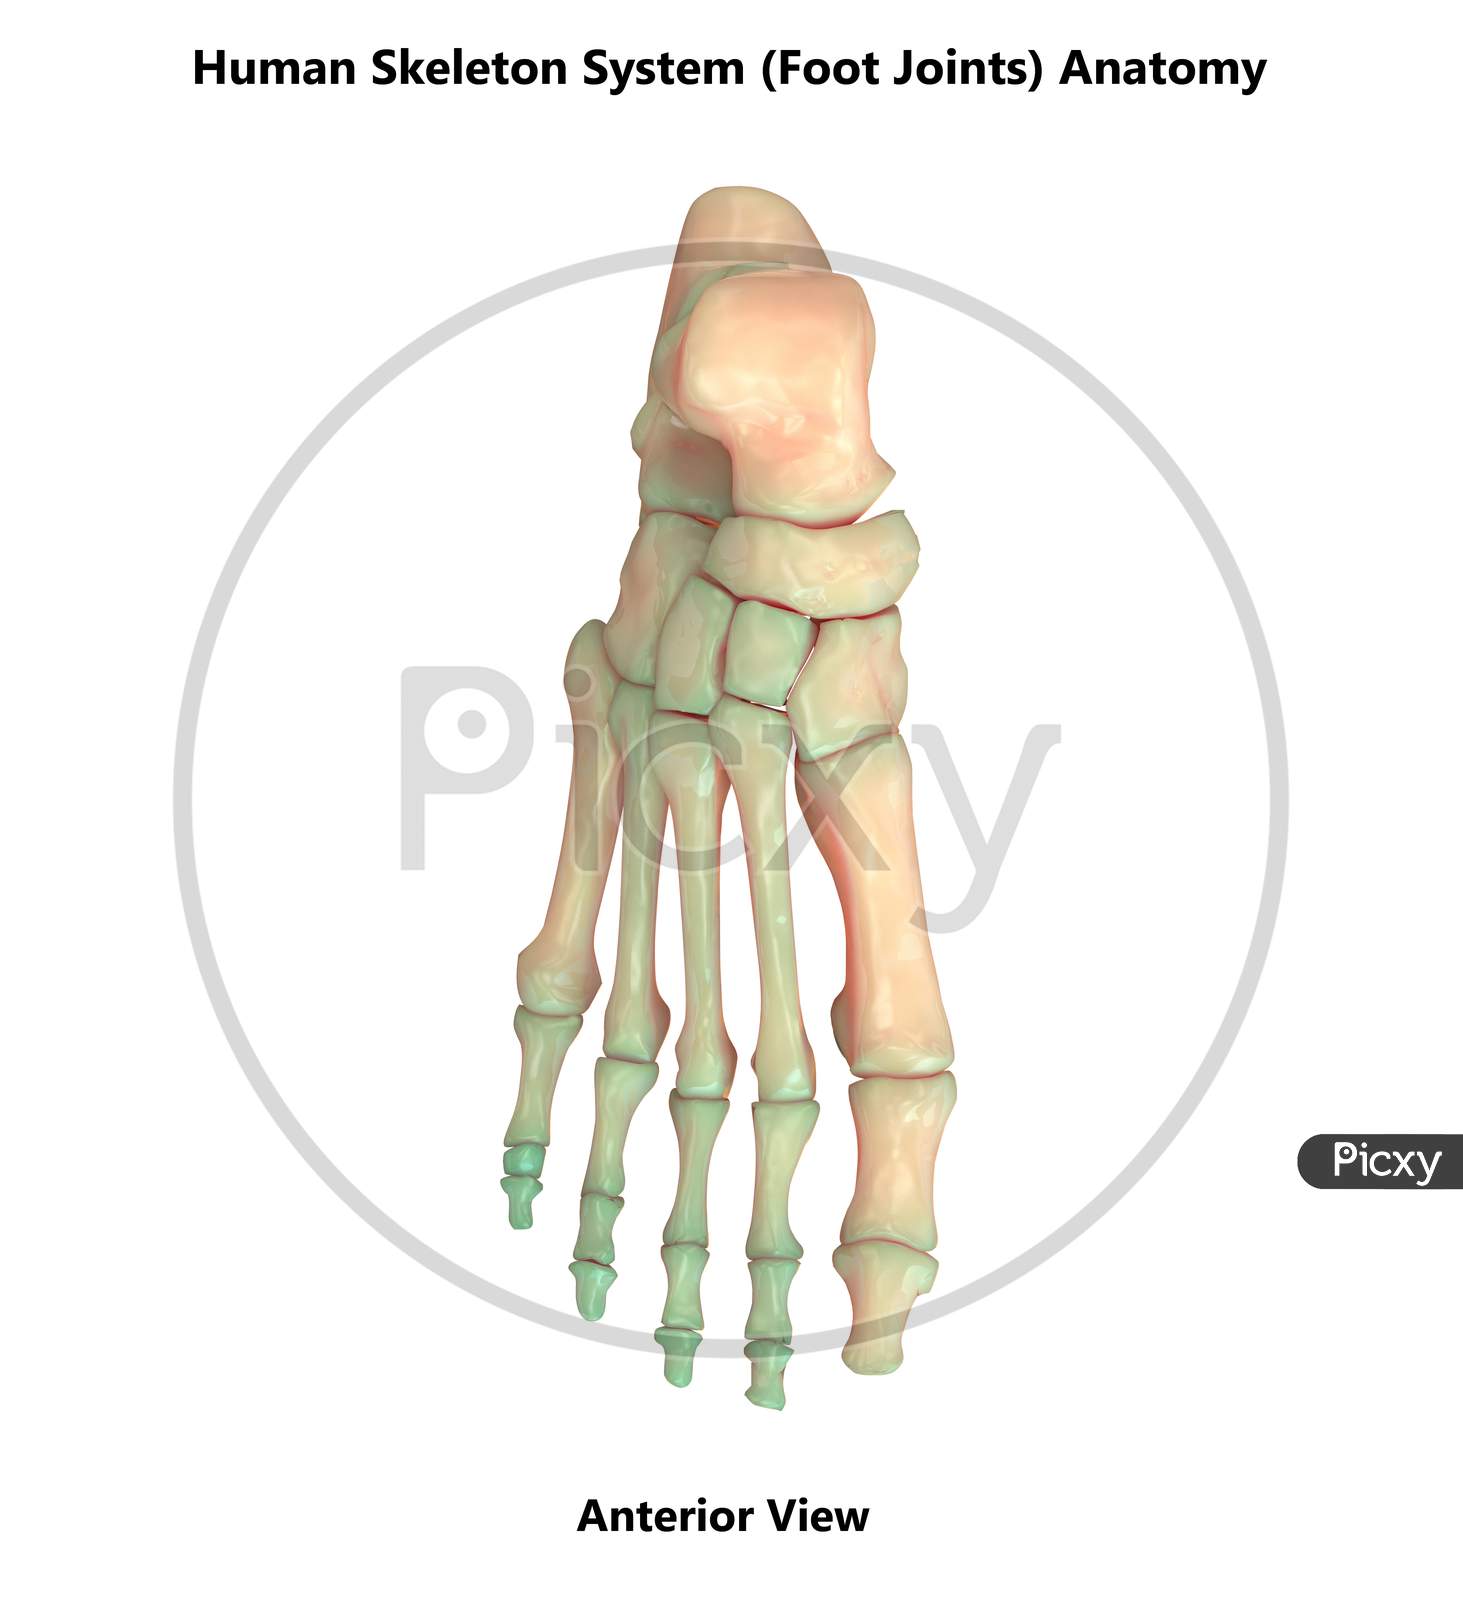 Human Skeleton System Anatomy (Foot Joints)